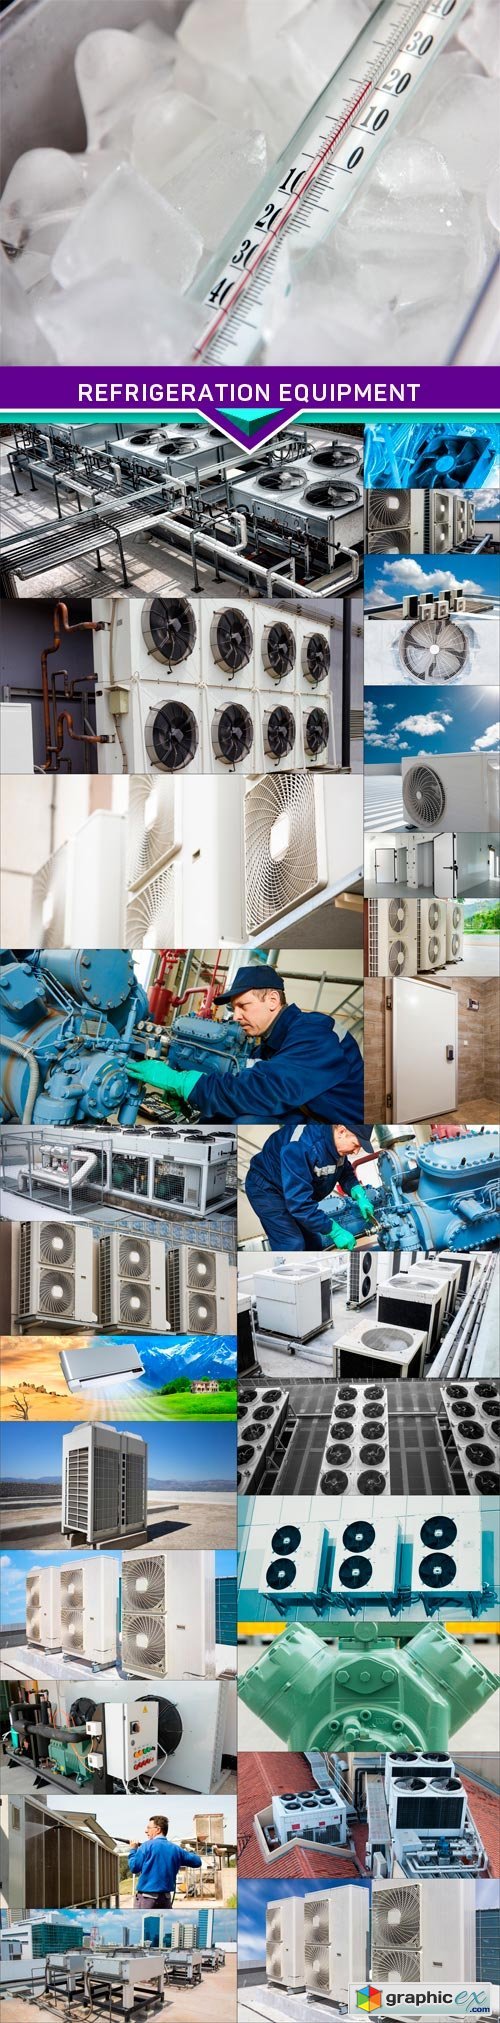 Industrial refrigeration equipment and air conditioning systems 28X JPEG